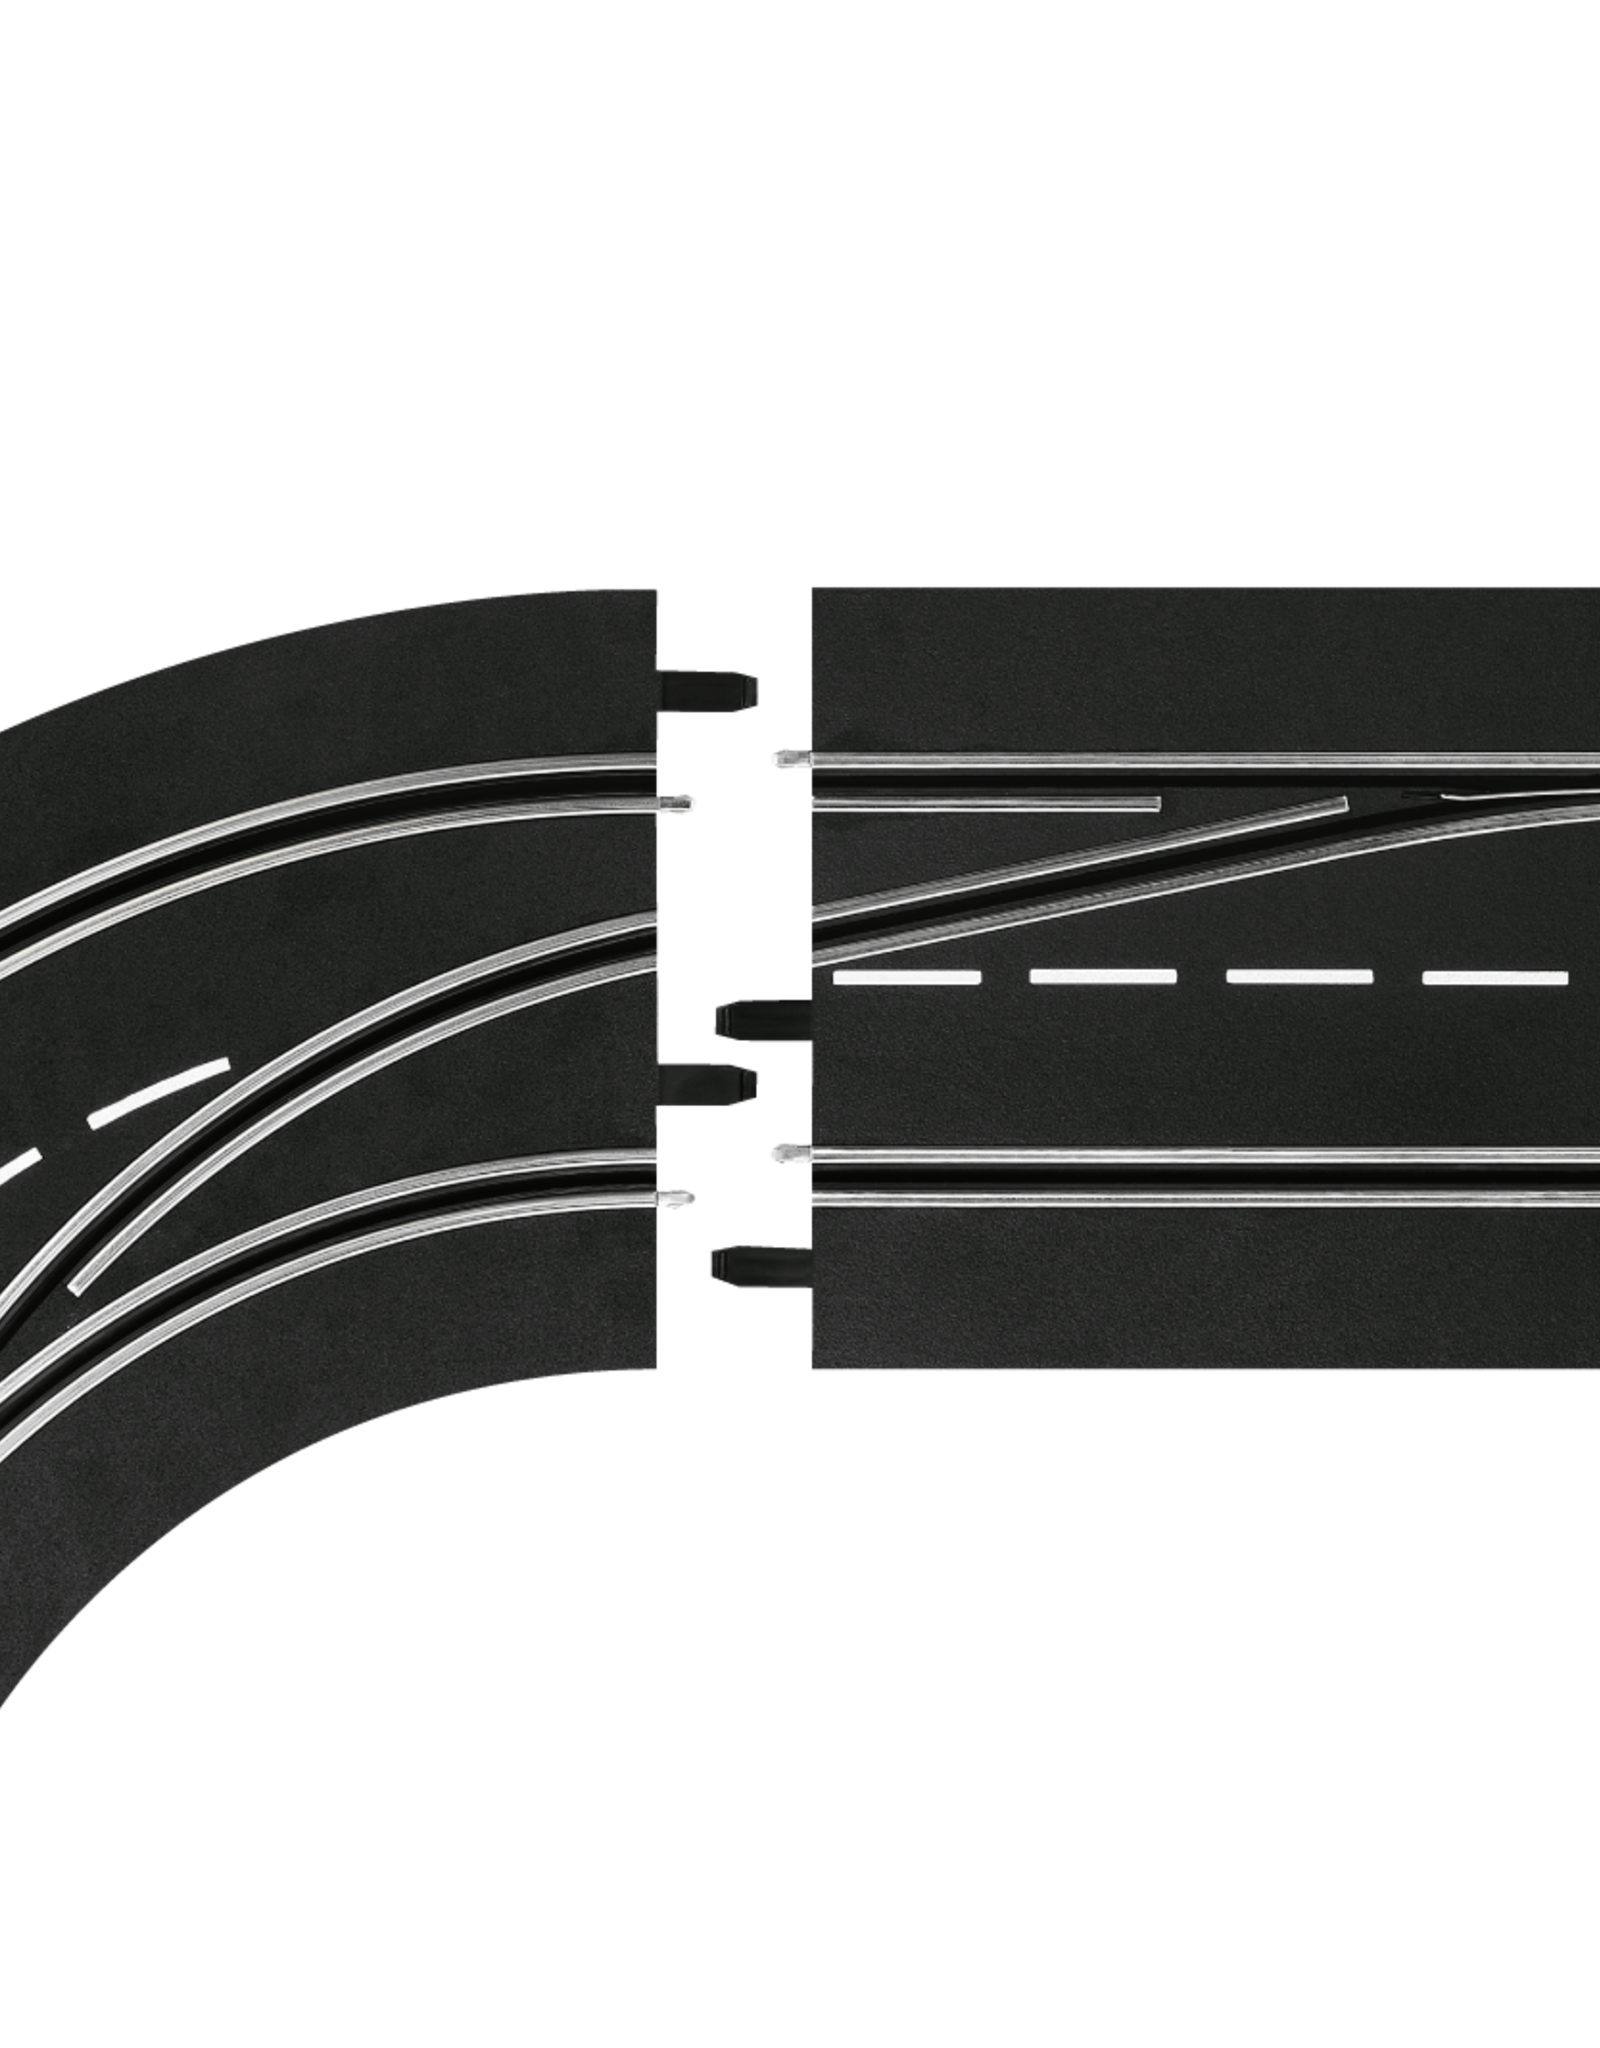 carrera CAR30363 Lane Change Curve, Left (Out to In), Digital 124/132